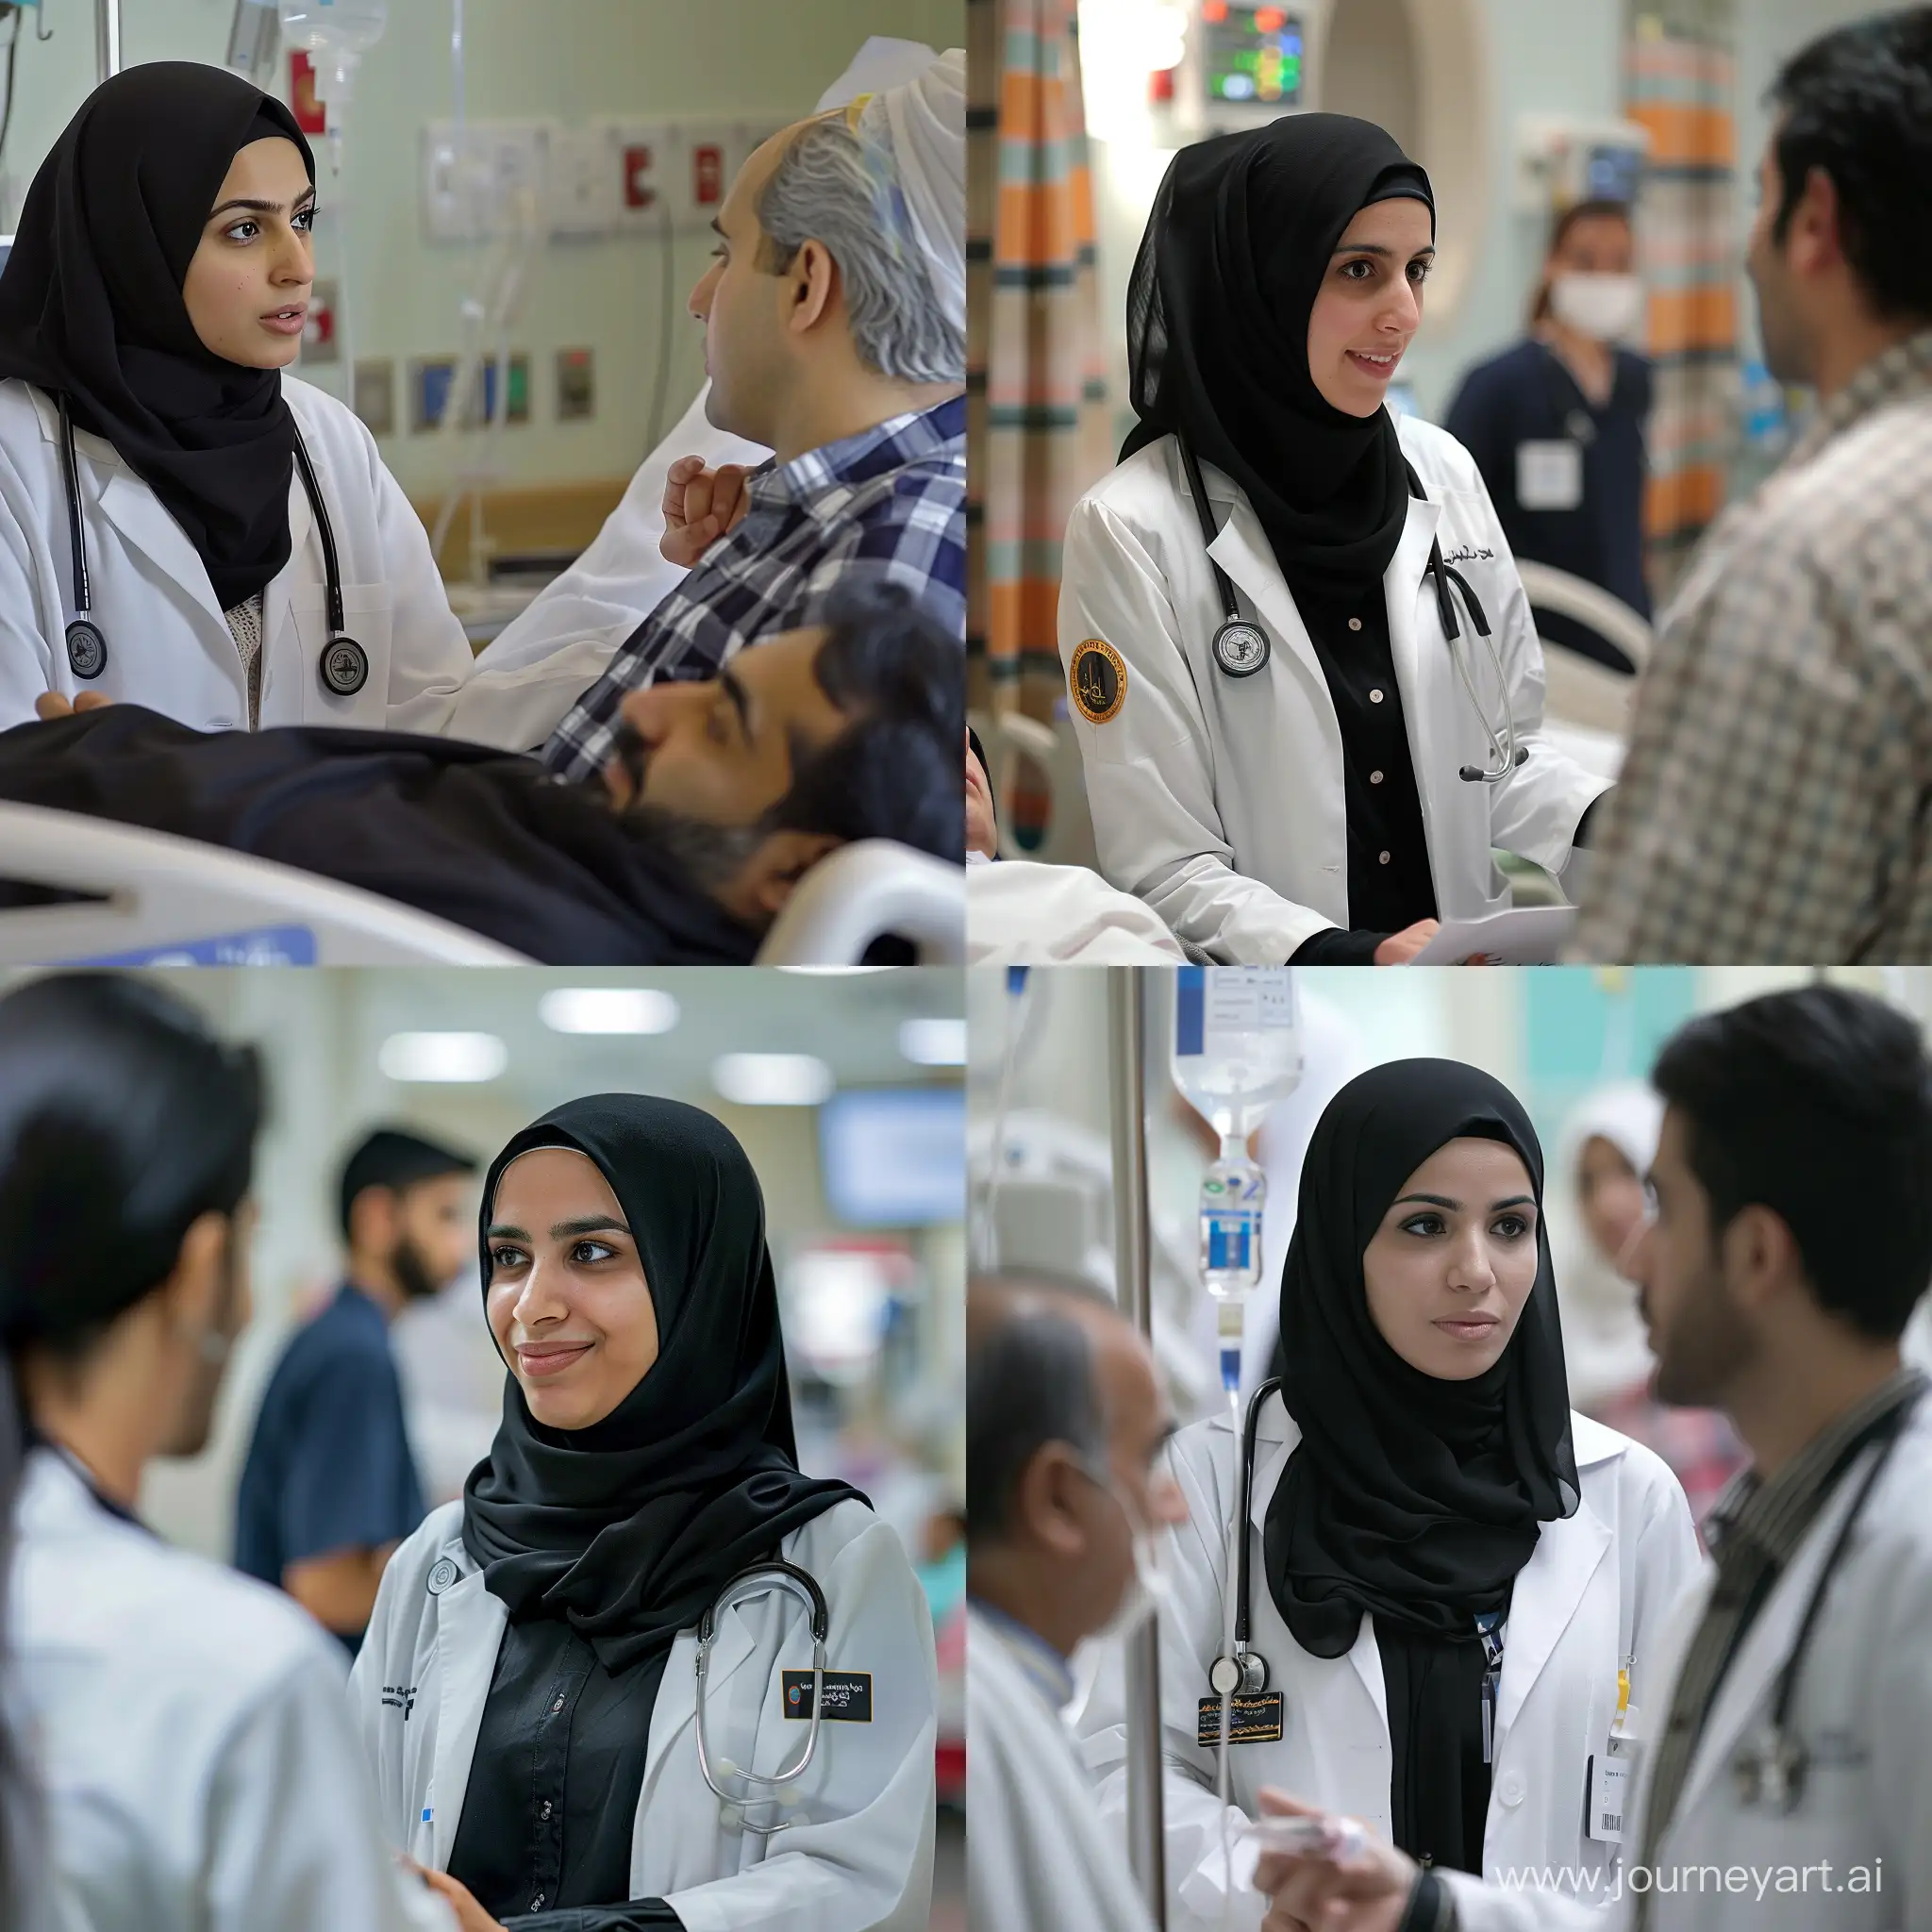 Dedicated-Female-Medical-Student-in-Black-Hijab-and-White-Coat-Providing-Patient-Education-at-Hospital